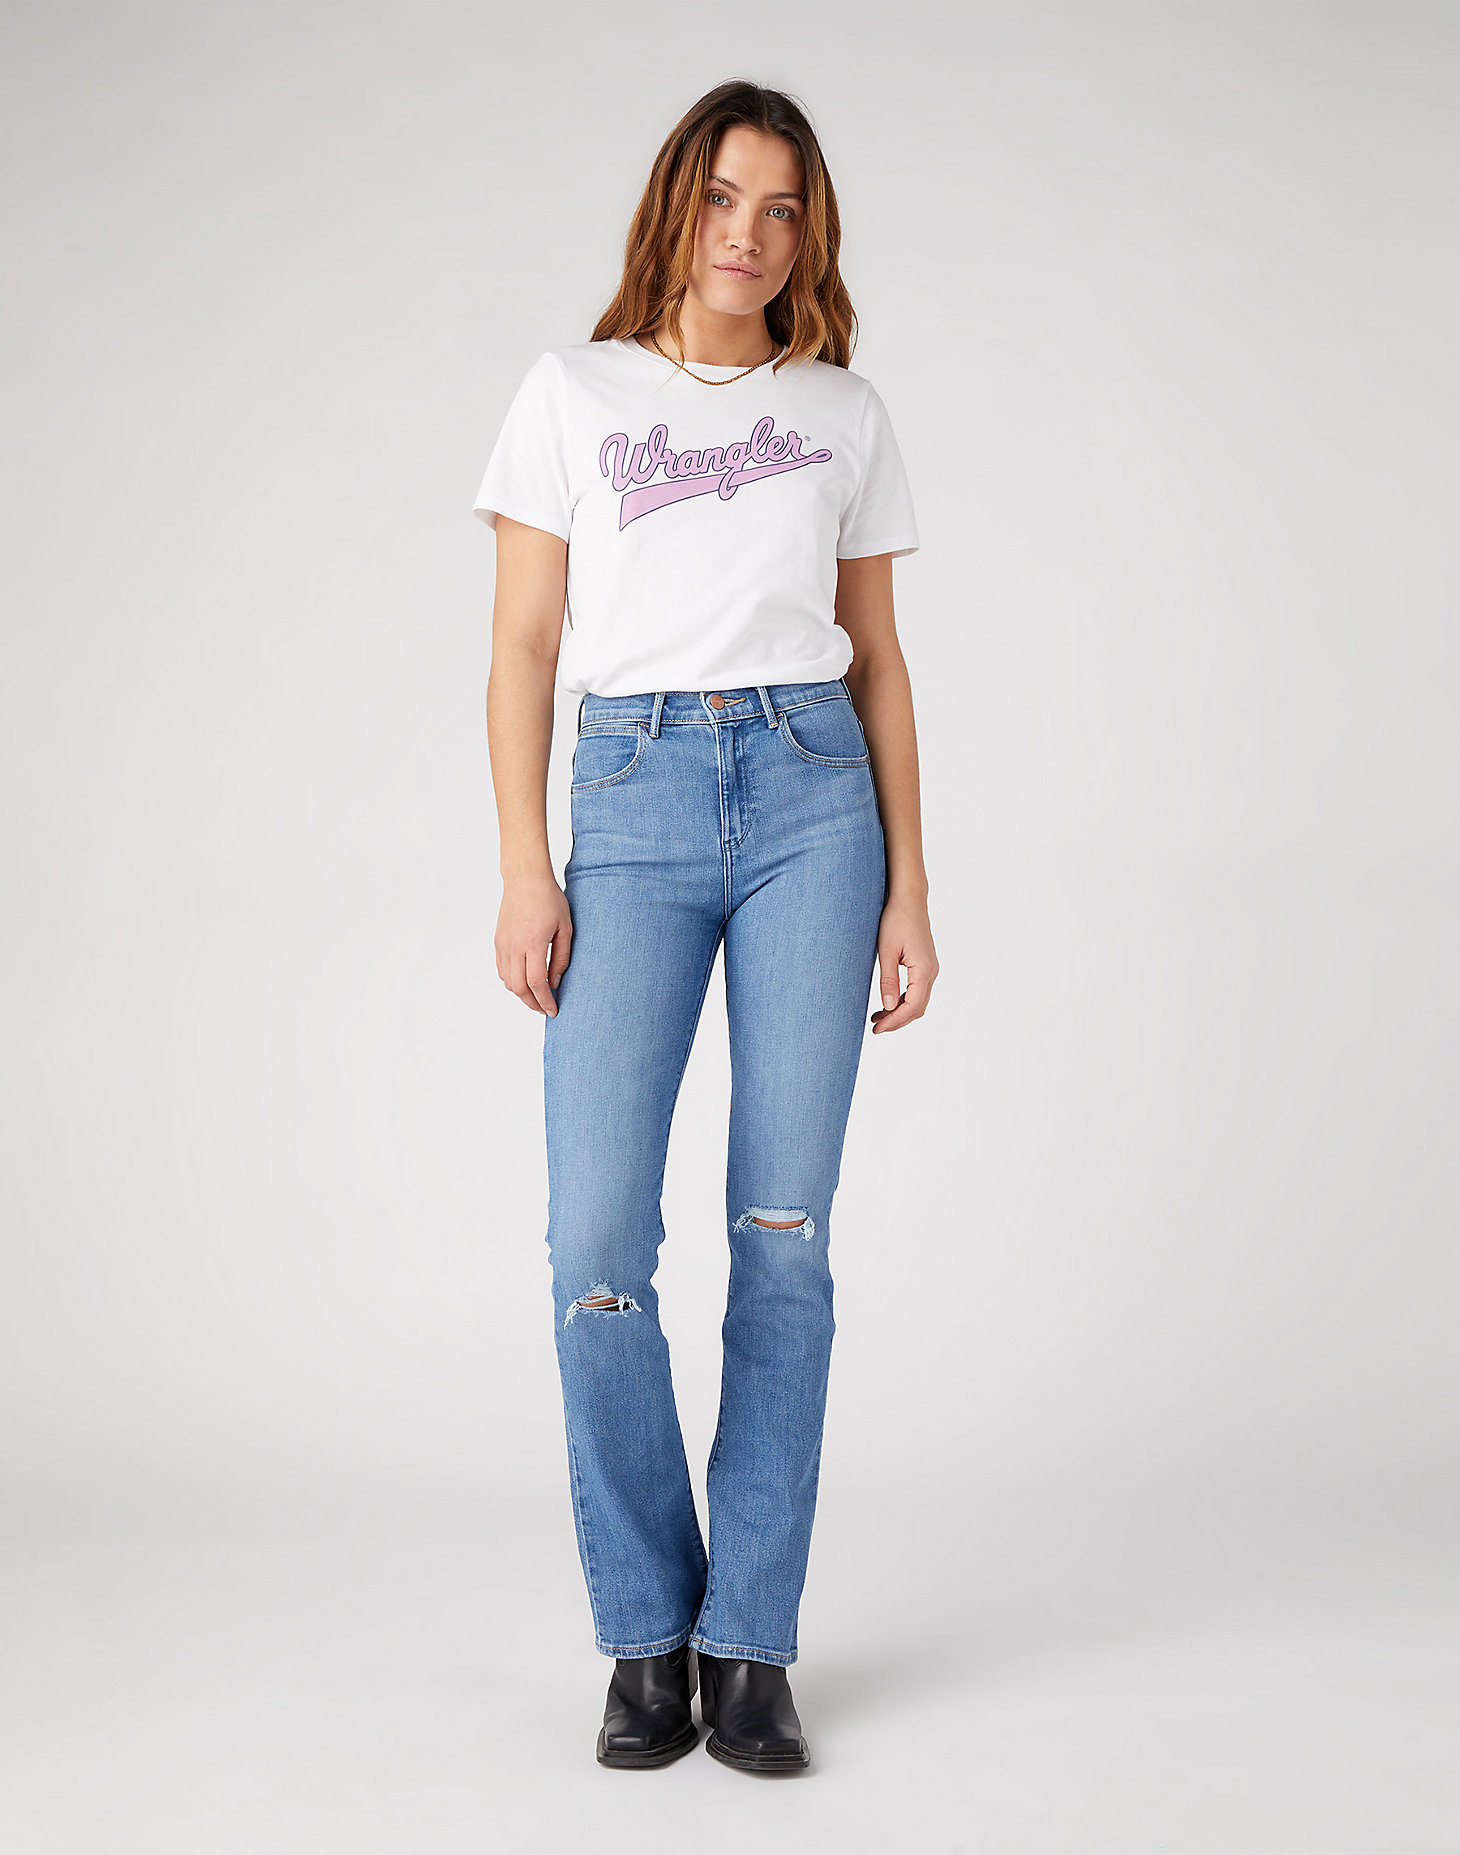 Bootcut Jeans in Riptide alternative view 1